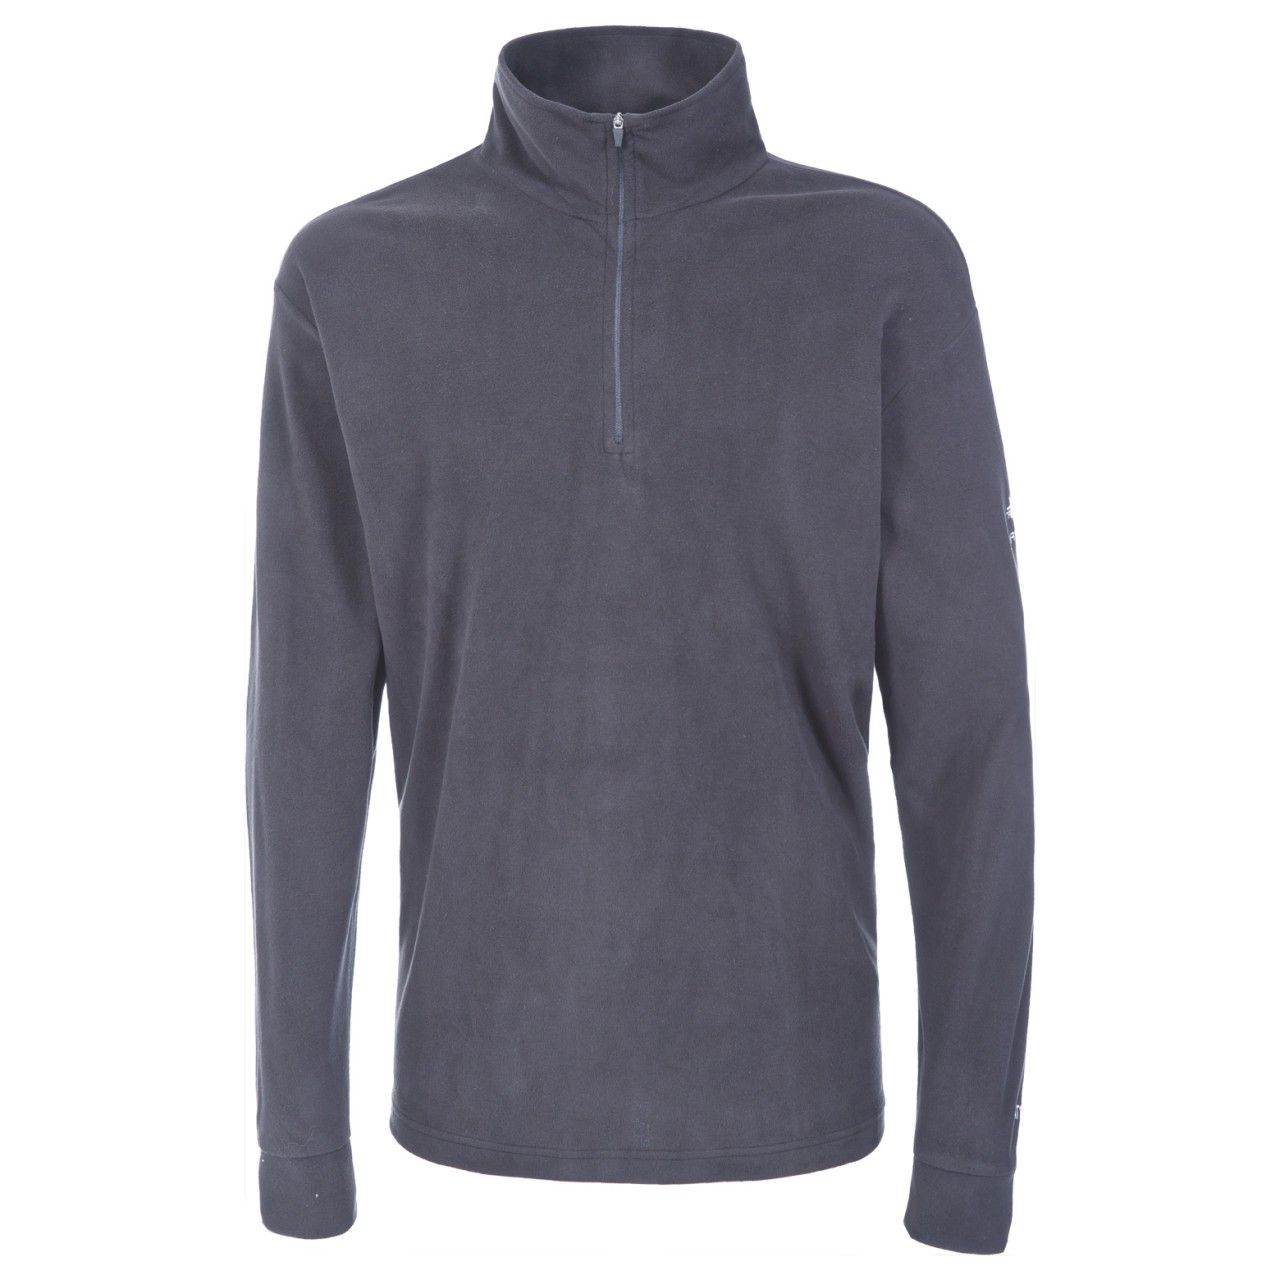 Microfleece. 1/2 zip. Airtrap, 130gsm. 100% Polyester microfleece. Trespass Mens Chest Sizing (approx): S - 35-37in/89-94cm, M - 38-40in/96.5-101.5cm, L - 41-43in/104-109cm, XL - 44-46in/111.5-117cm, XXL - 46-48in/117-122cm, 3XL - 48-50in/122-127cm.